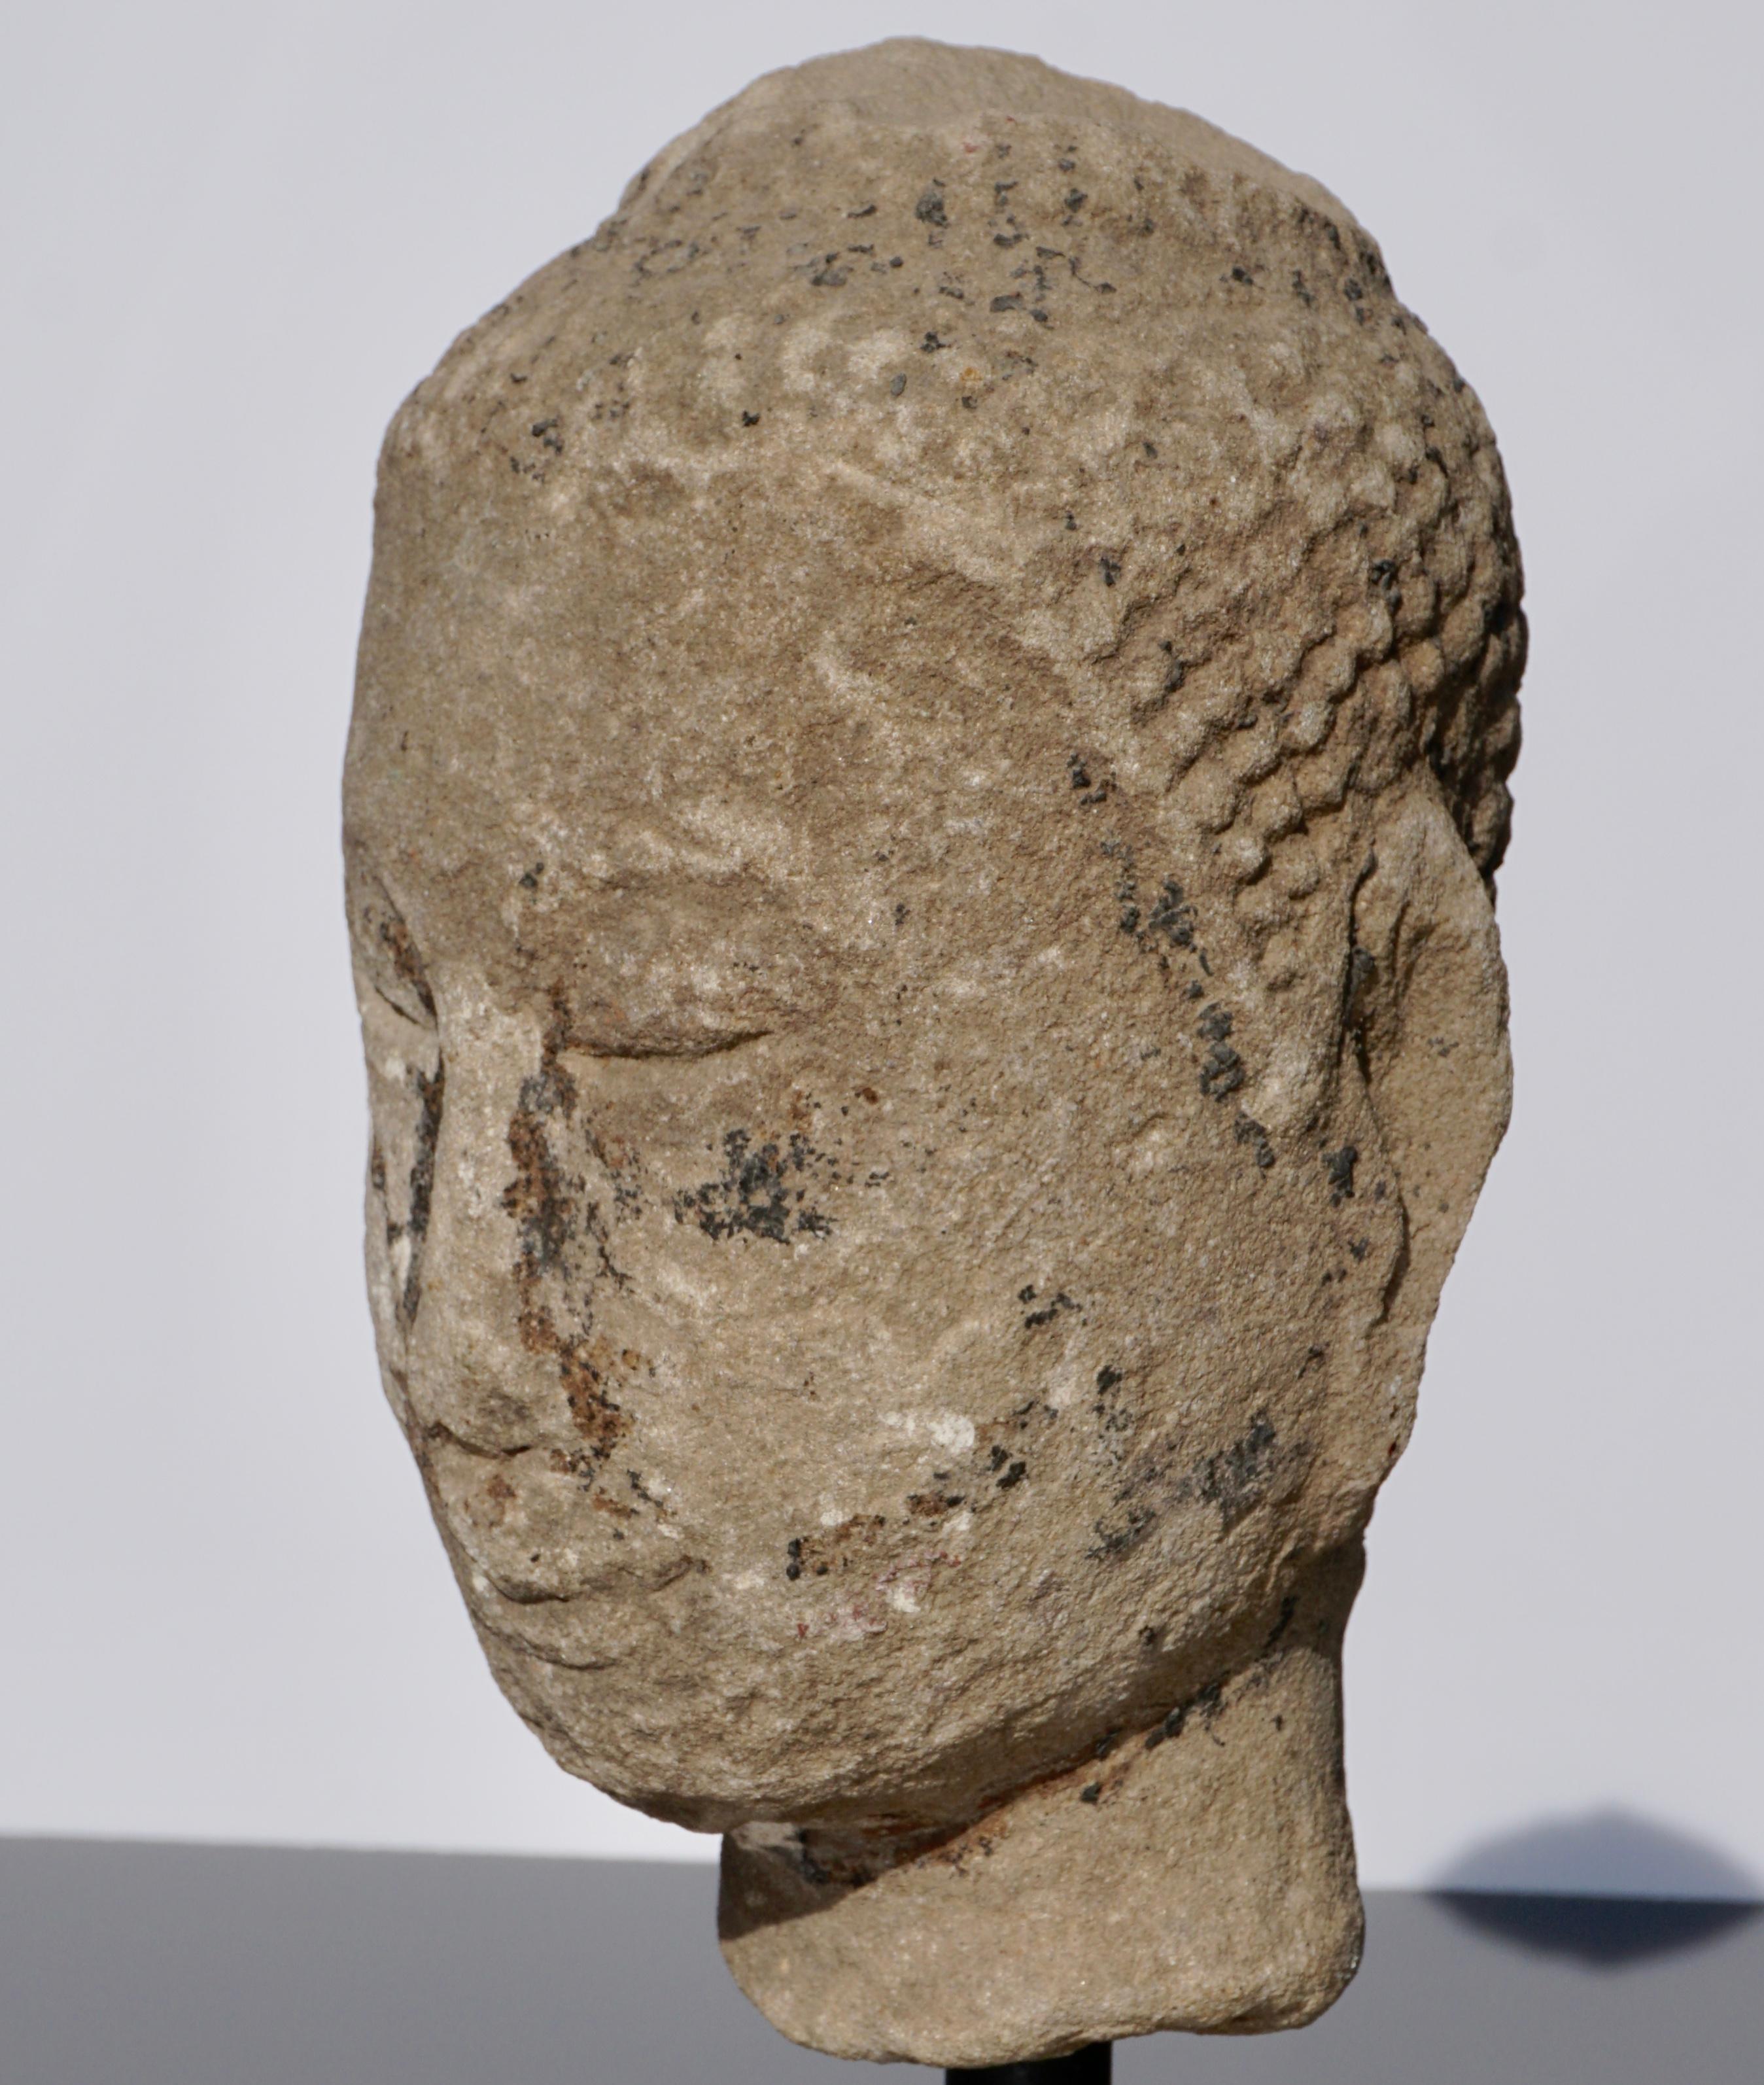 A very serene and calming weathered sandstone Buddha head from Thailand, circa 16th century or earlier. Traces of polychrome and golf pigments throughout. Gilding around nose looks like tears eminatinting from Buddha’s tear ducts.. I love the